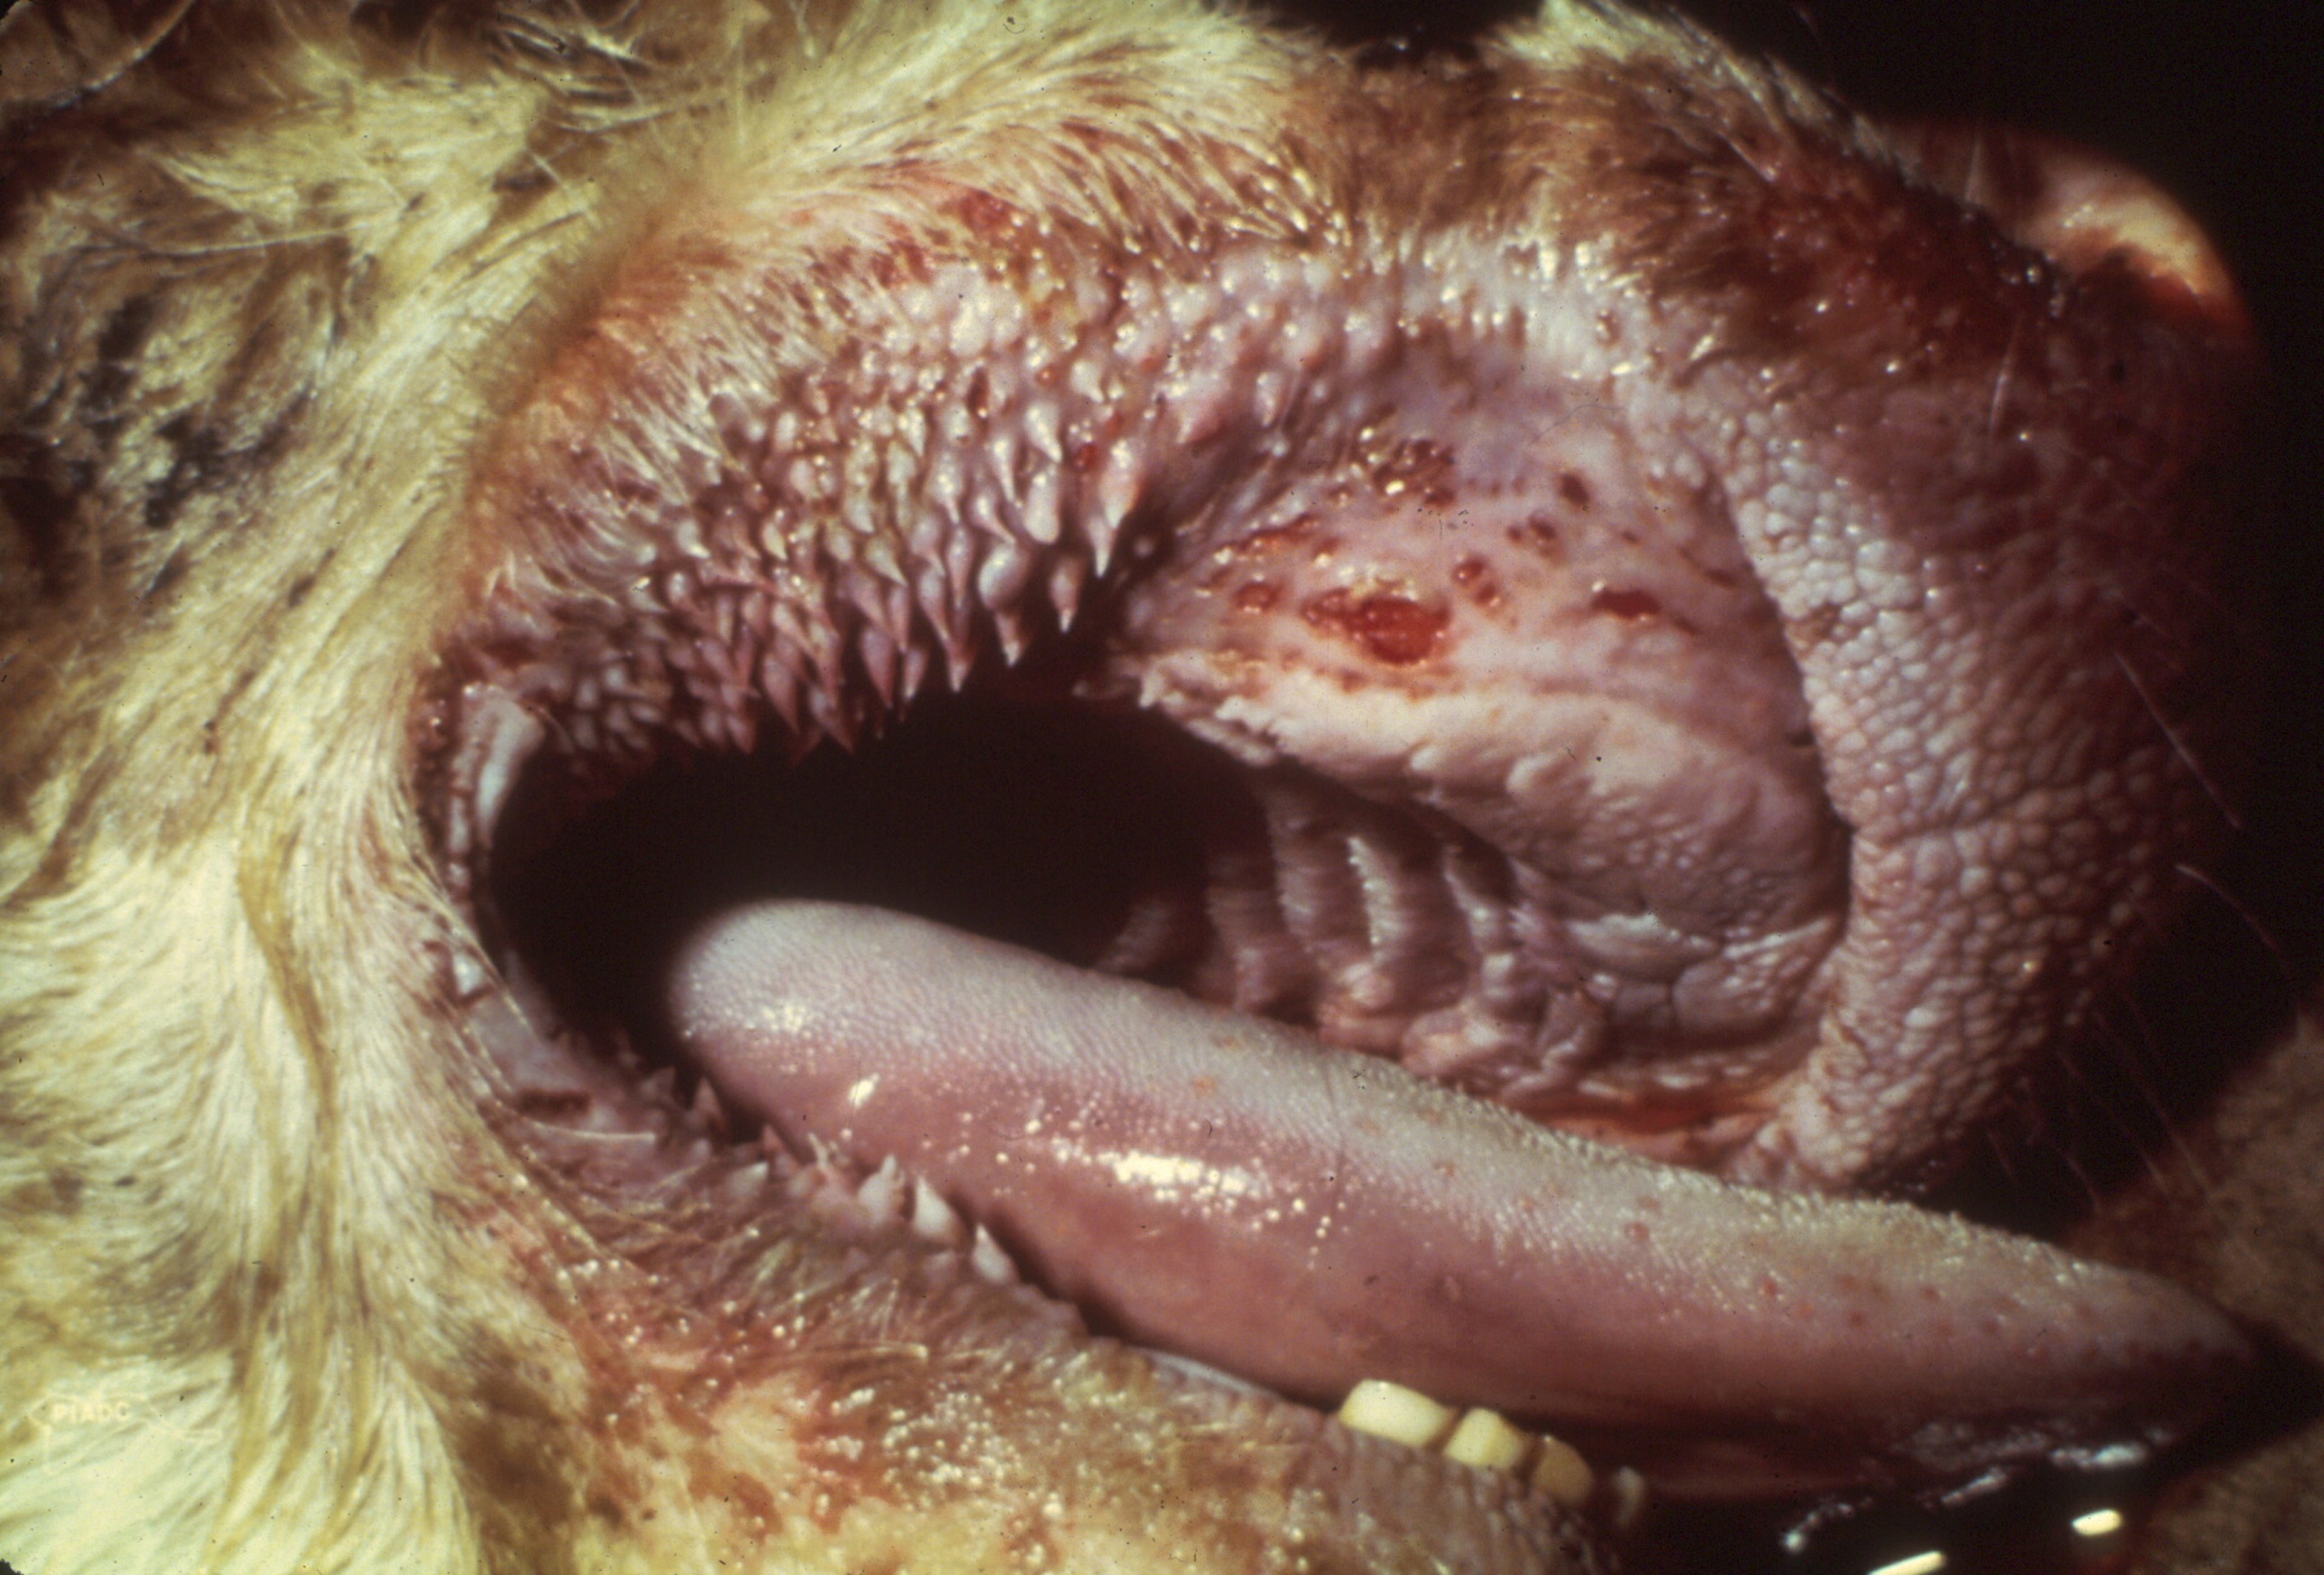 Rinderpest virus, oral lesions, cow